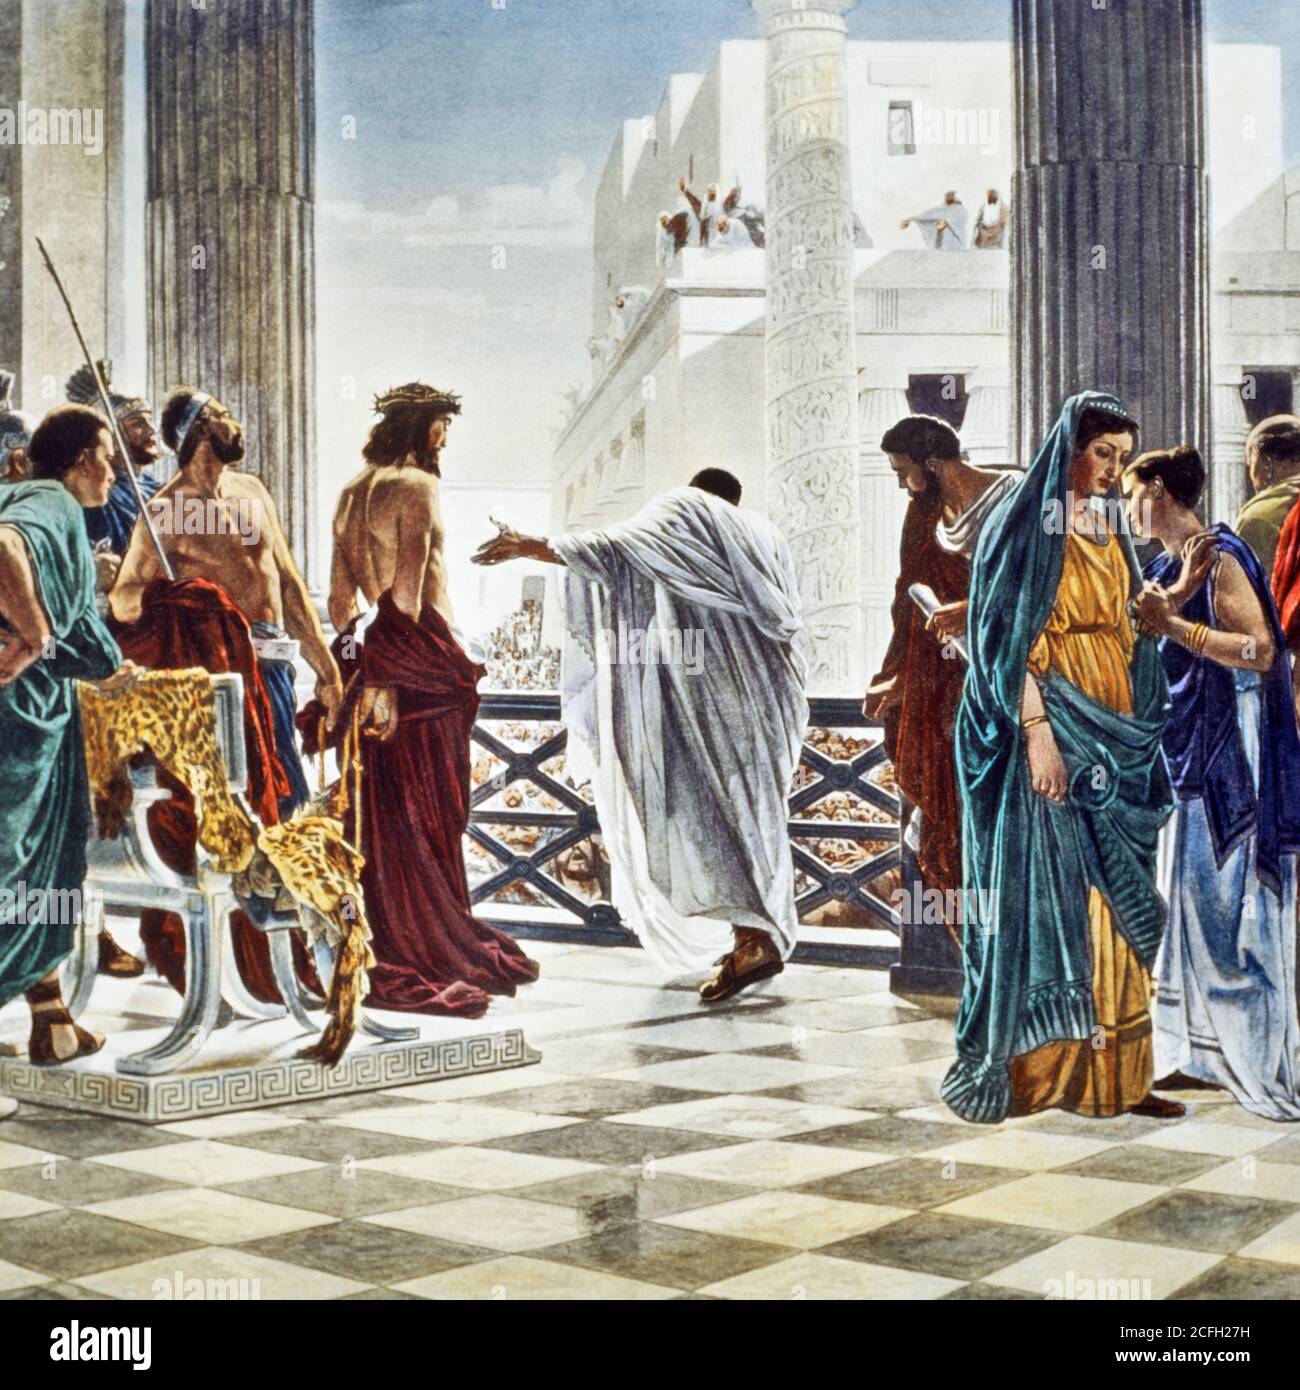 1870s PONTIUS PILATE PRESENTING THE SCOURGED JESUS TO THE CROWD SAYING ECCE HOMO BEHOLD THE MAN PAINTING BY ANTONIO CISER - kr8554 SPL001 HARS 1870s ARTS FAITHFUL ARTWORK BEHOLD FAITH HOMO SPIRITUAL BELIEF BIBLICAL GOVERNOR INSPIRATIONAL NEW TESTAMENT OLD FASHIONED Stock Photo